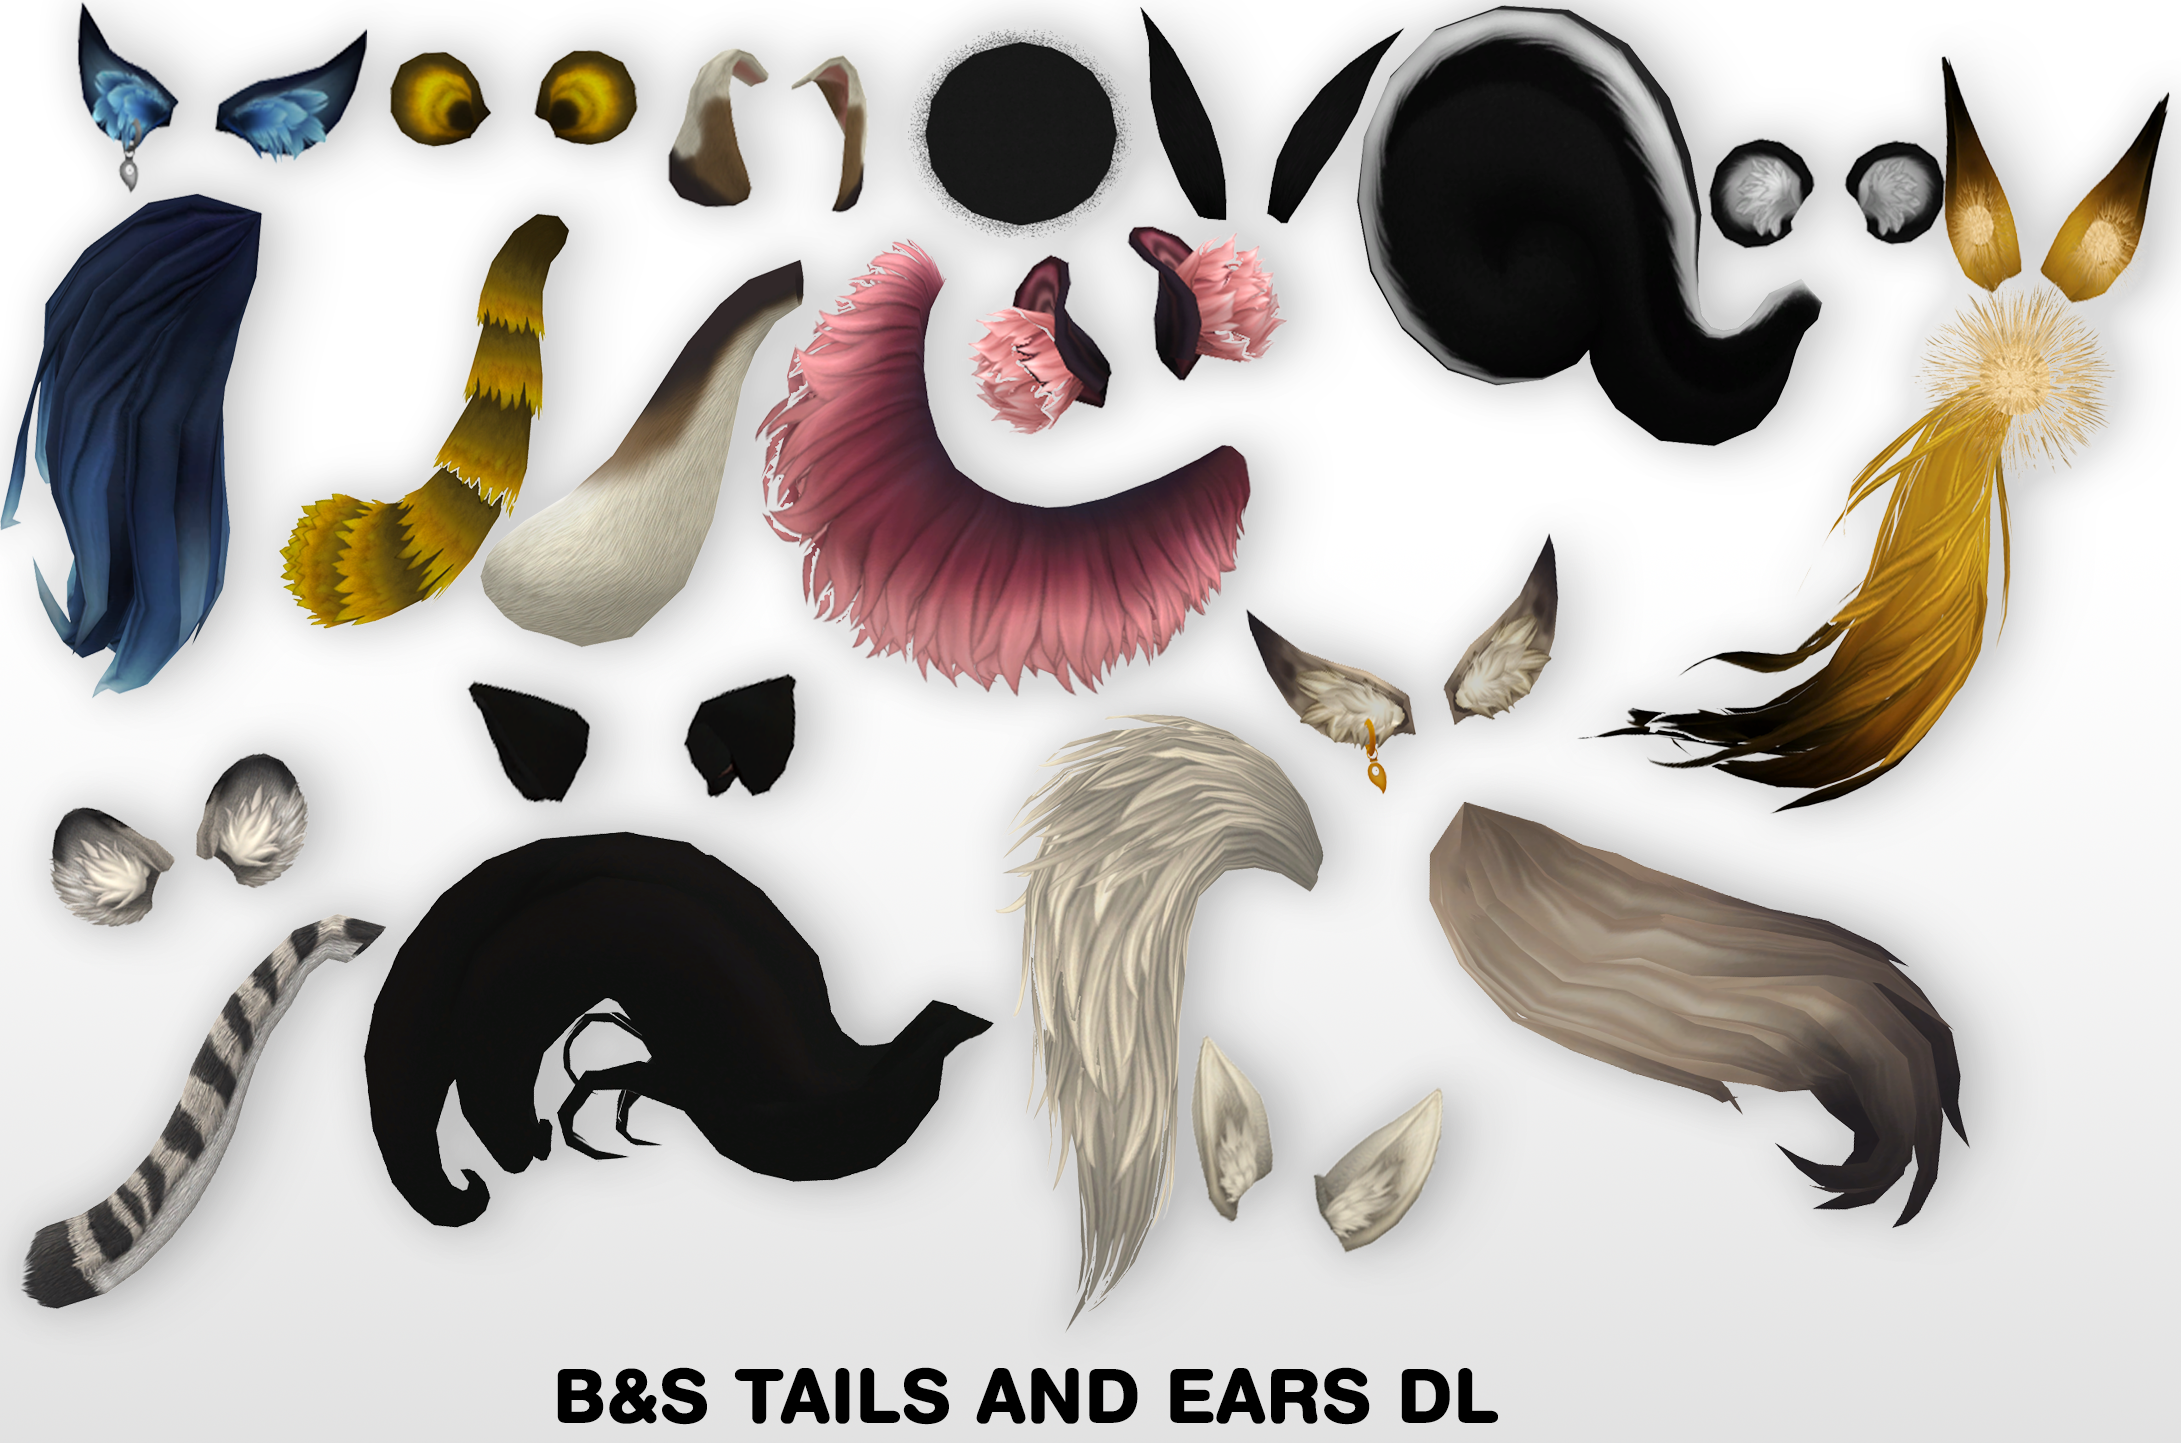 MMD Tails and Ears DL by UnluckyCandyFox on DeviantArt